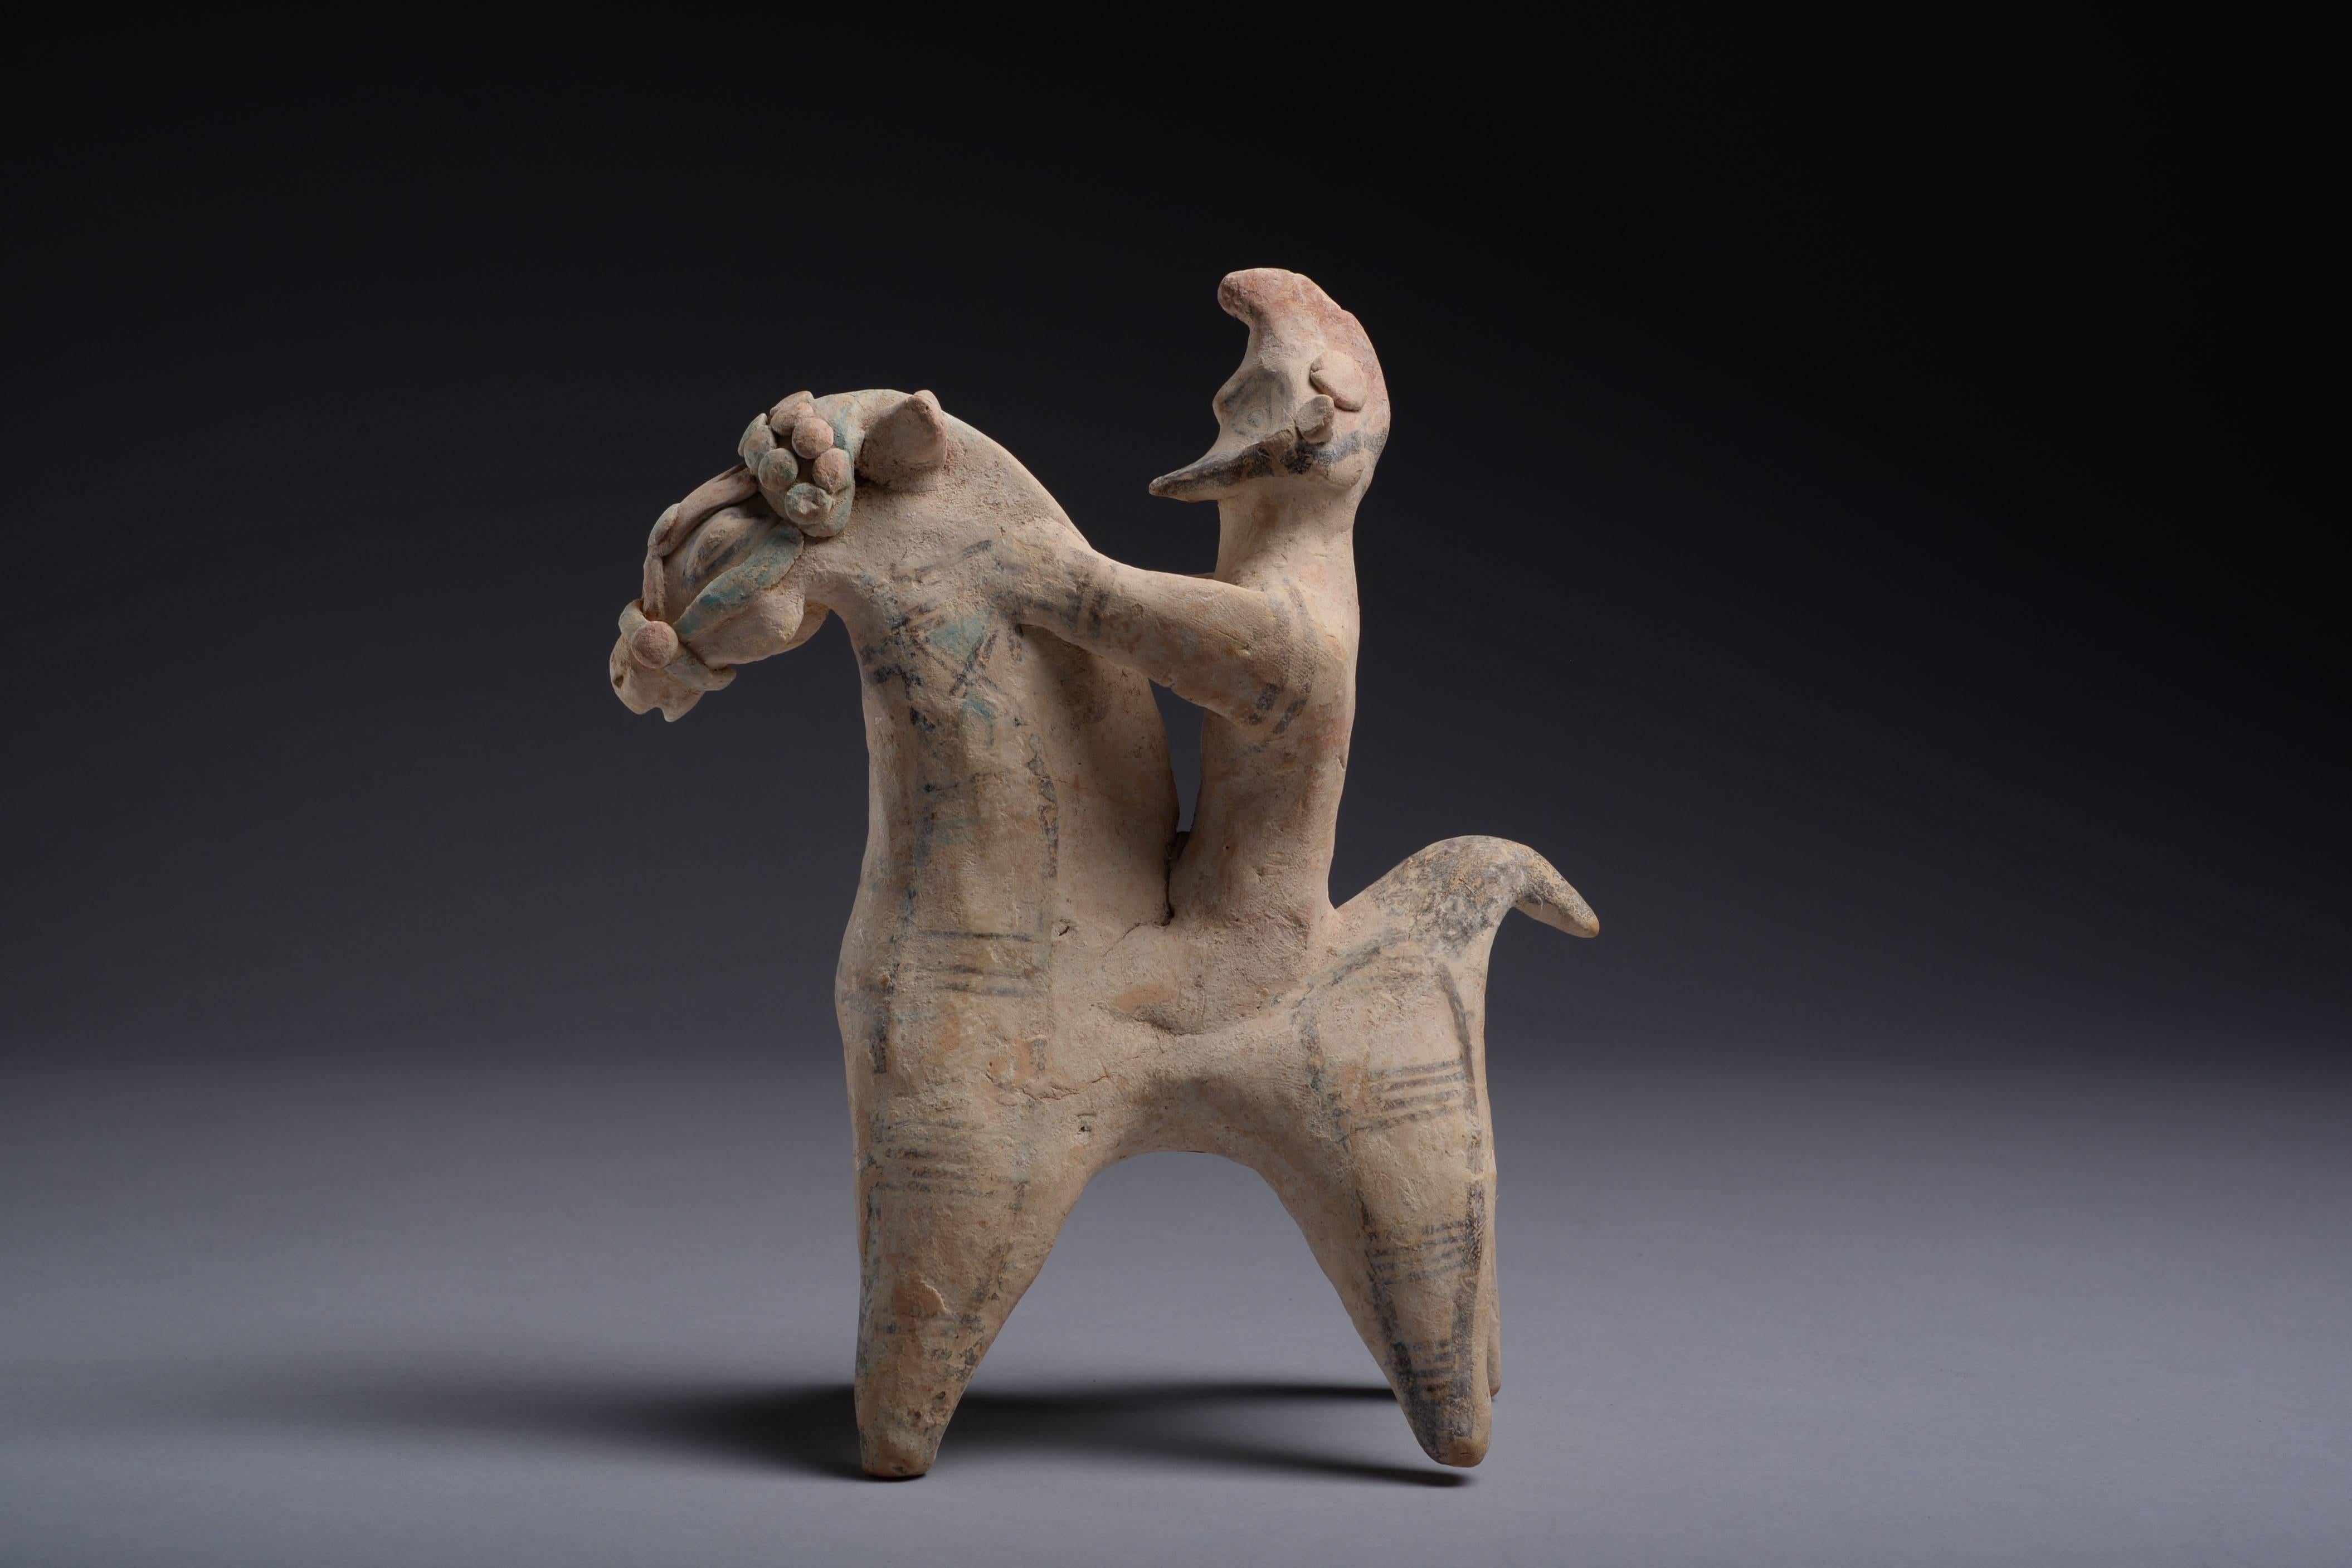 A terracotta model of a warrior on horseback from Cyprus, dating to the Cypro-Archaic period, circa 7th-6th century BC.

The horse standing with a raised head, its bridle painted in red and green. The rider holding onto the horse’s neck with both